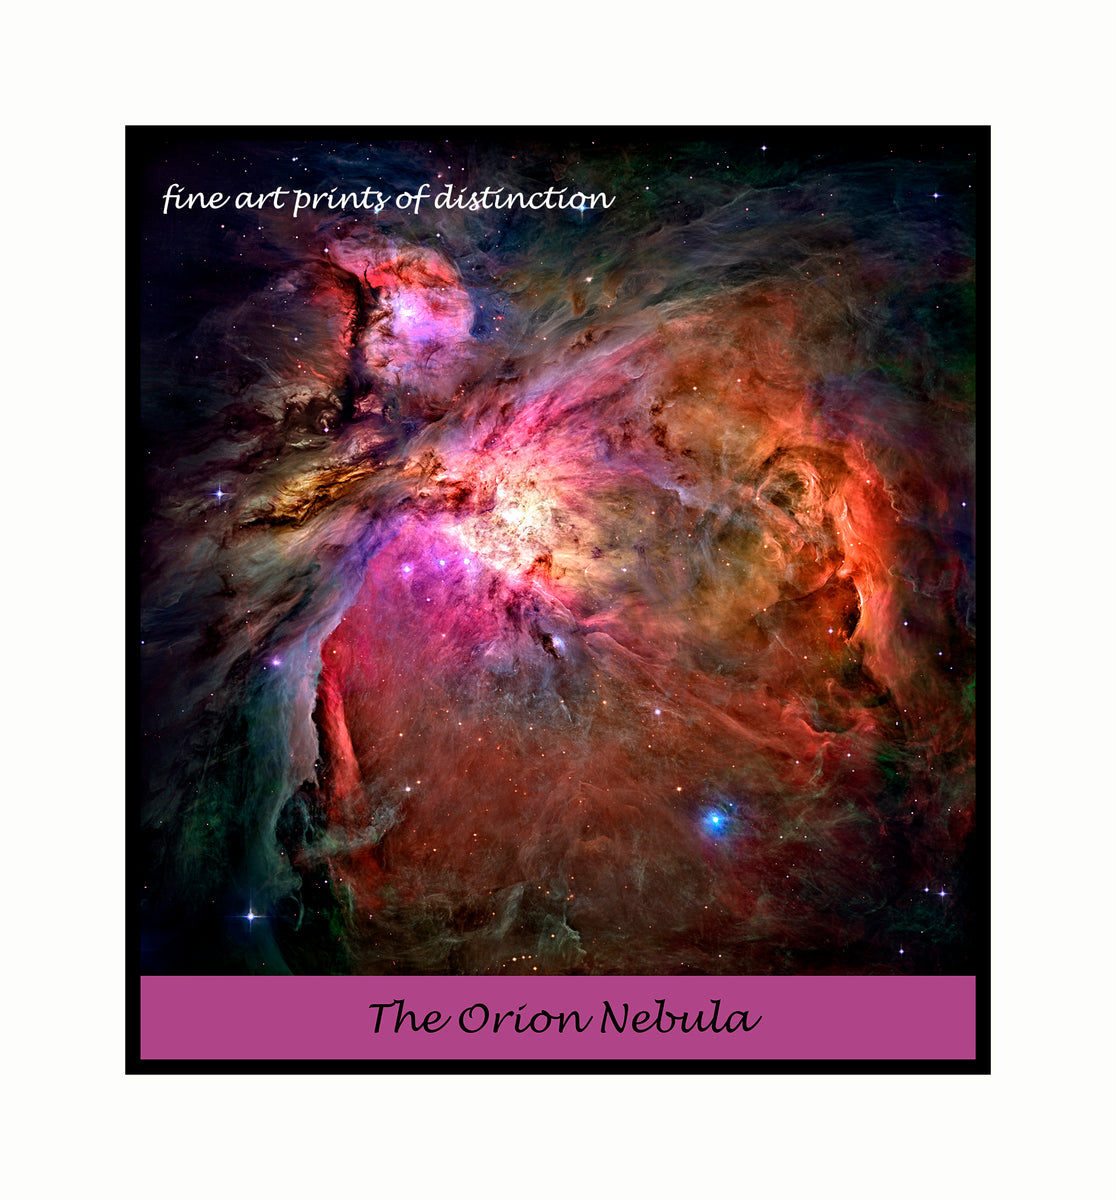 Premium quality poster of the Orion Nebula as seen from the Hubble space telescope